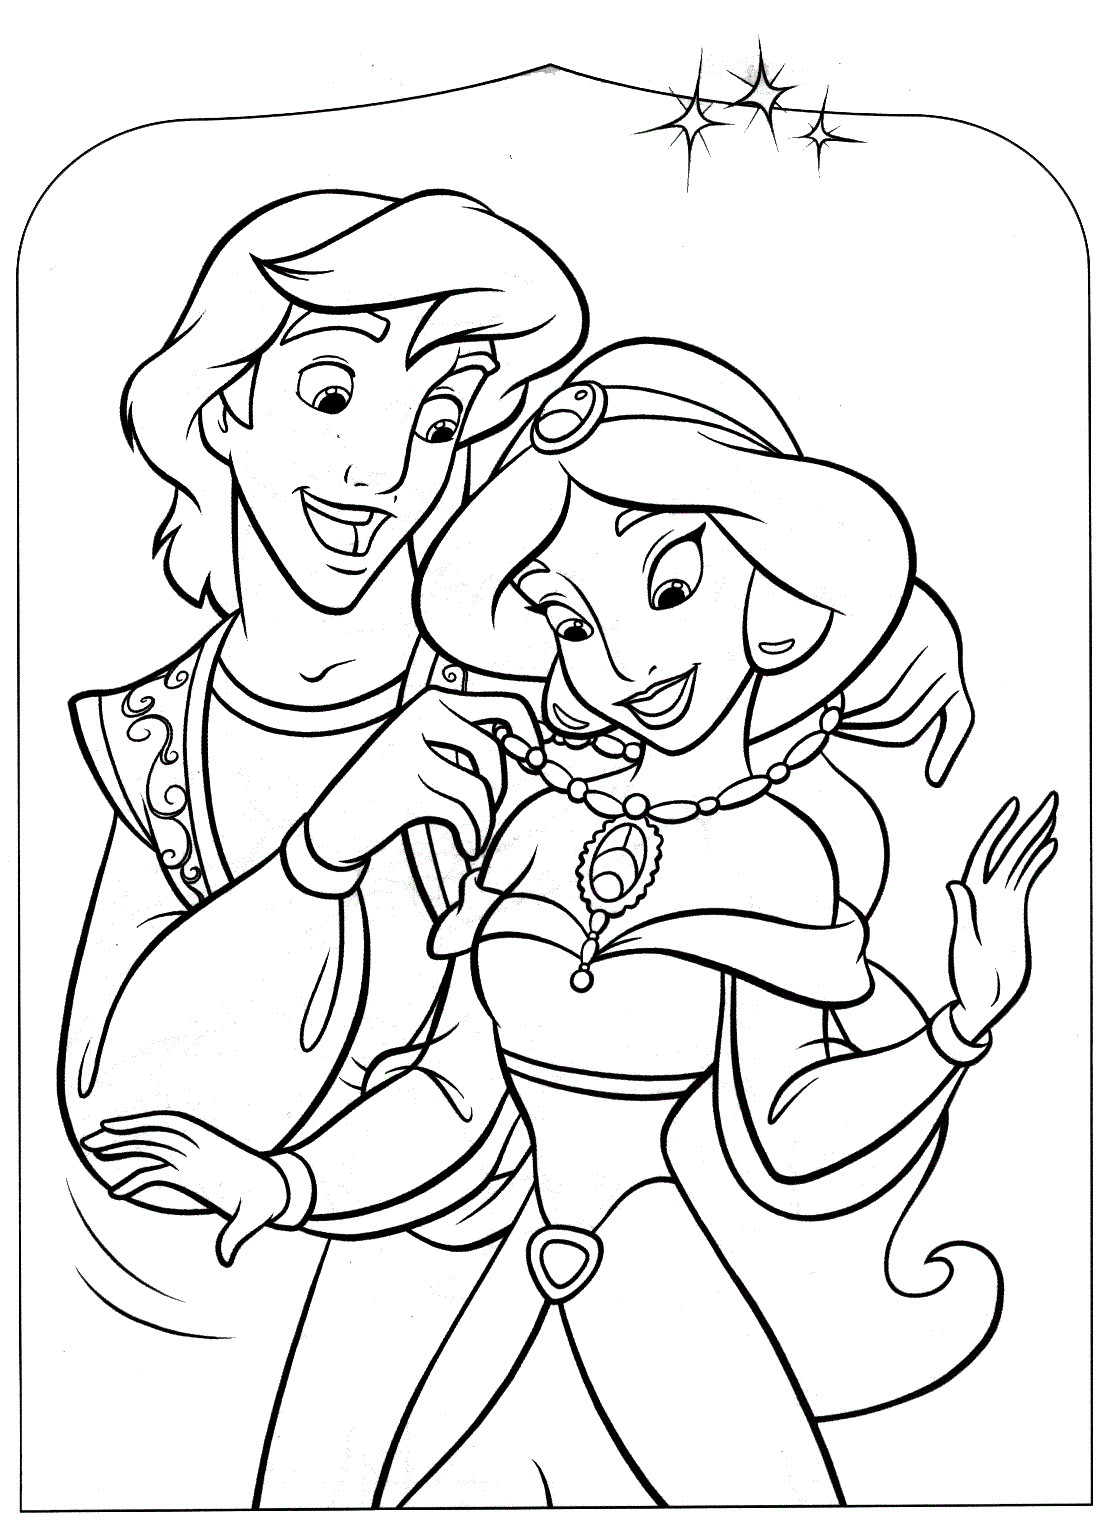 Free Printable Coloring Pages For Toddlers
 Free Printable Aladdin Coloring Pages For Kids